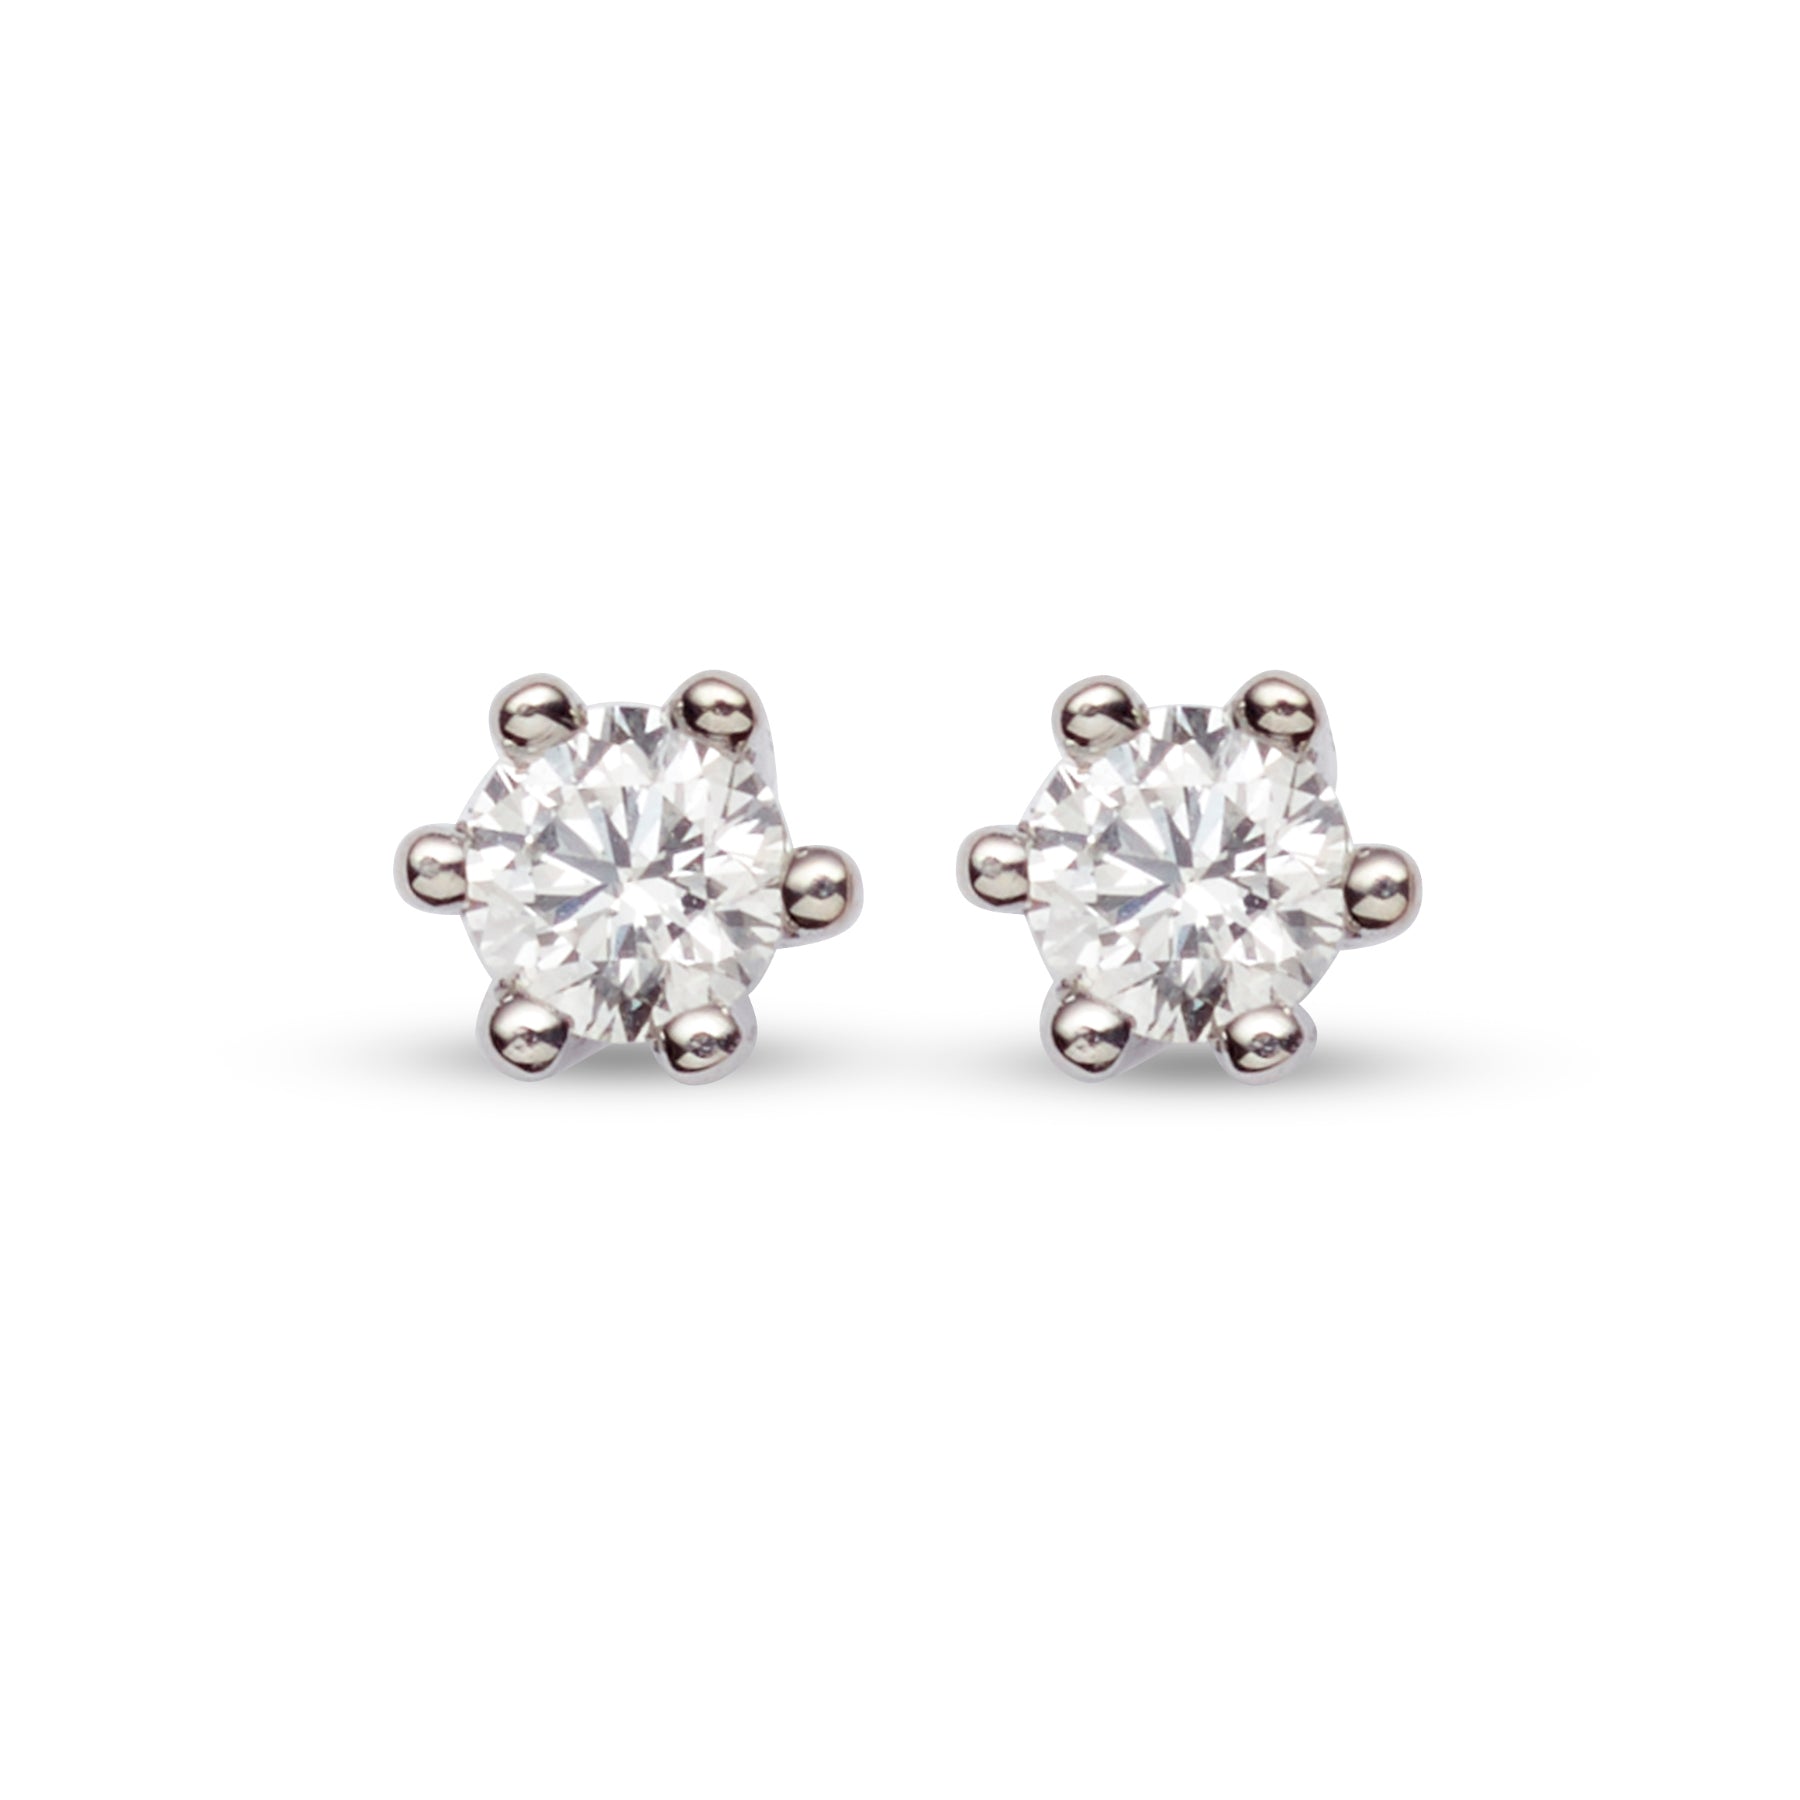 Marthe earrings in white gold with diamonds